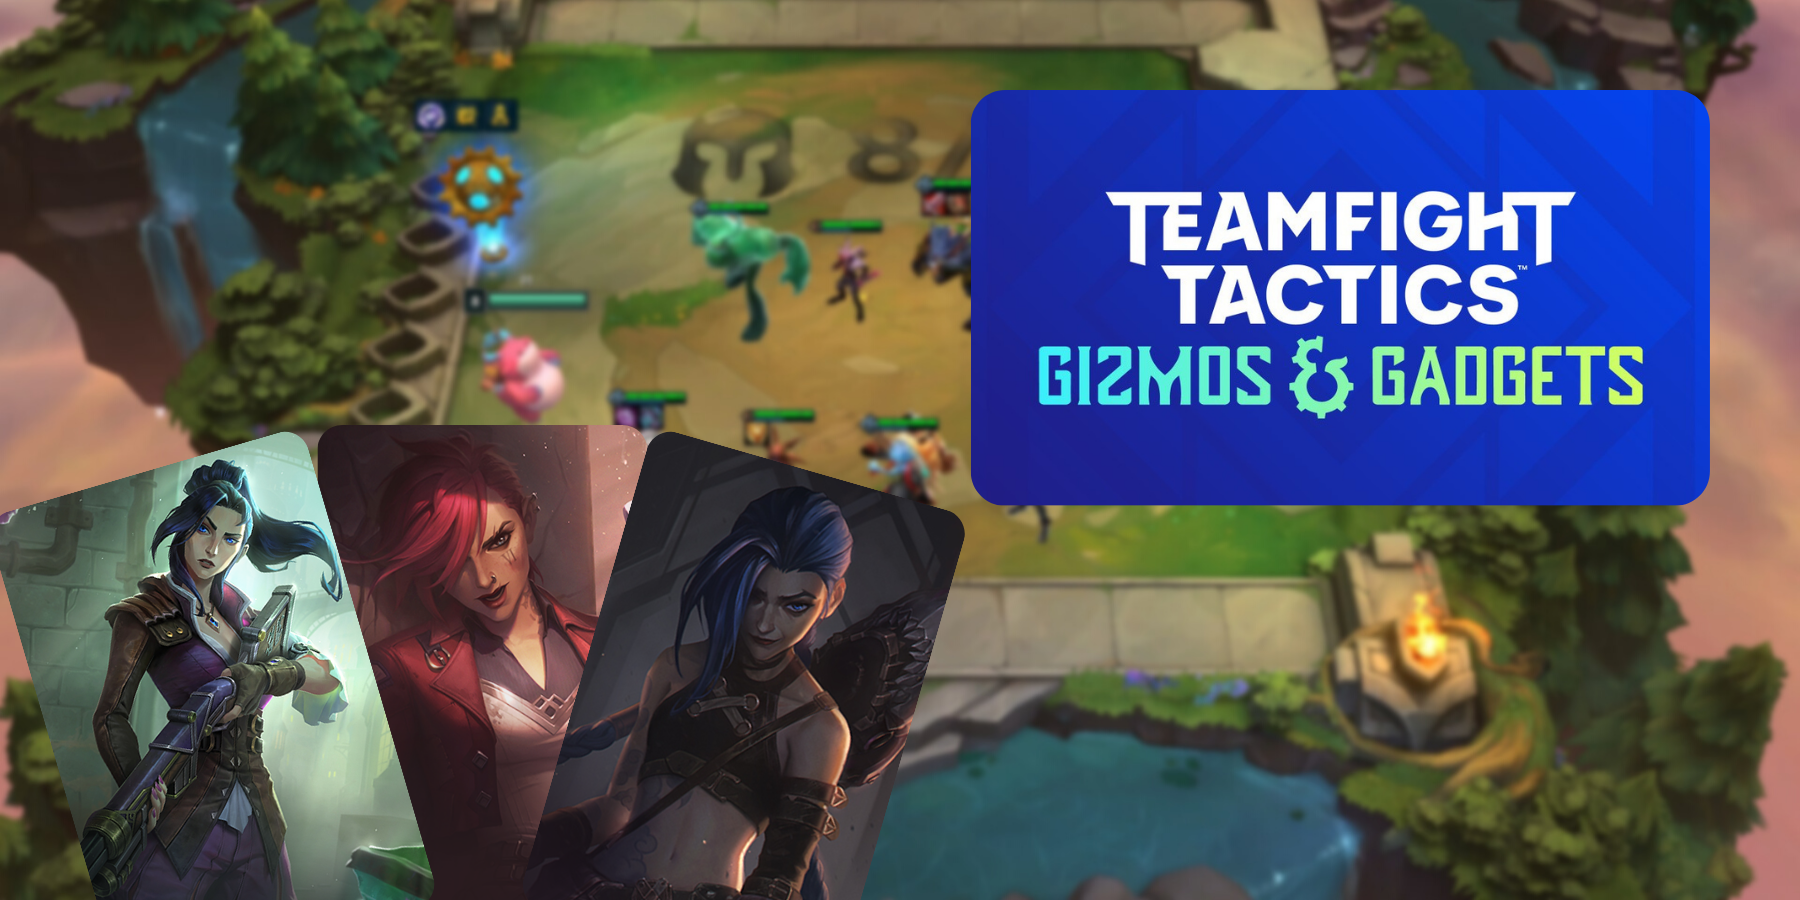 teamfight tactics gizmos and gadgets caitlyn vi and jinx together